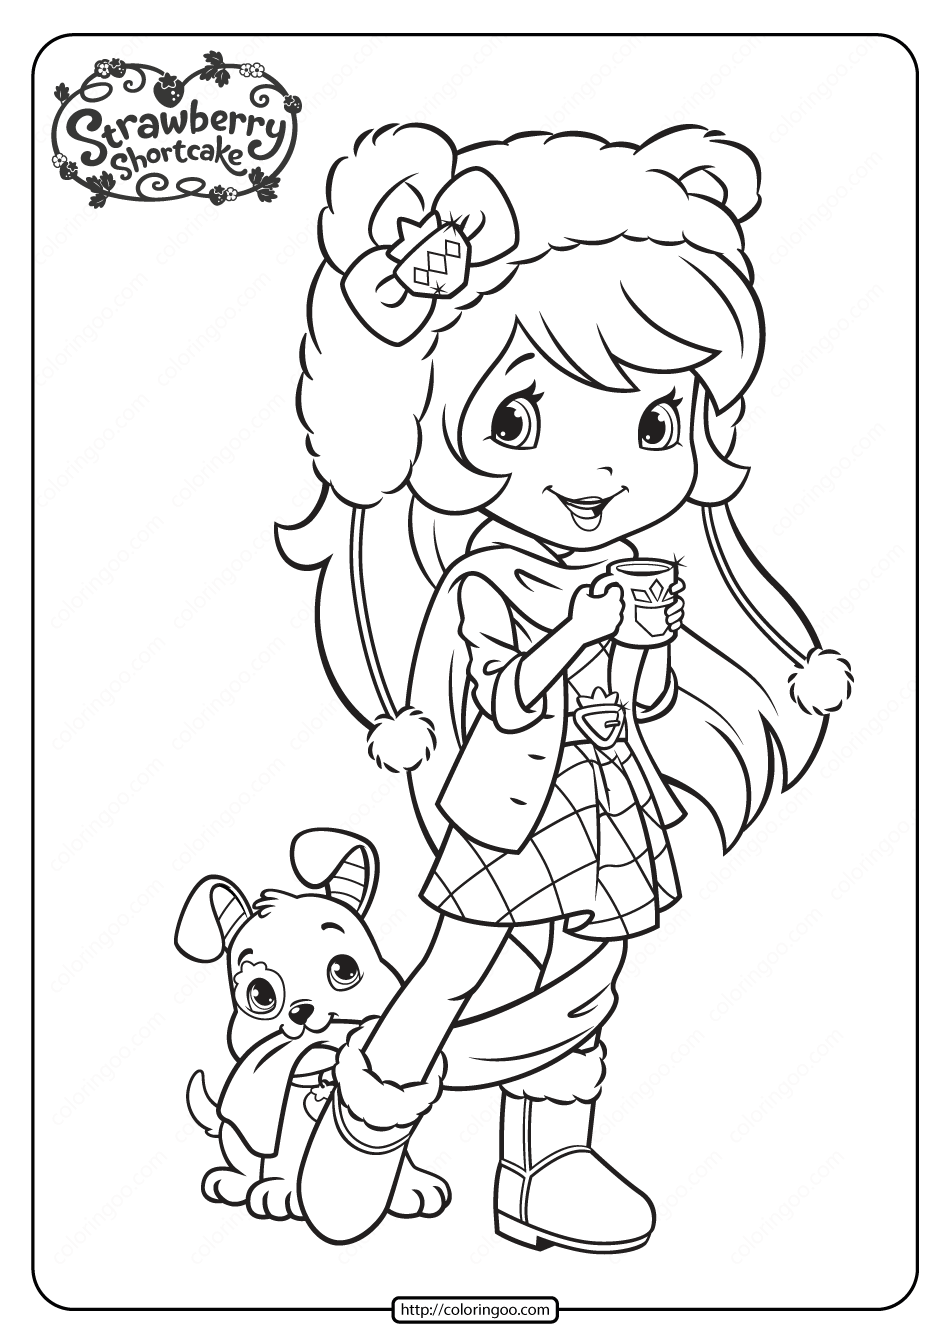 Printable Strawberry Shortcake Coloring Pages - 15